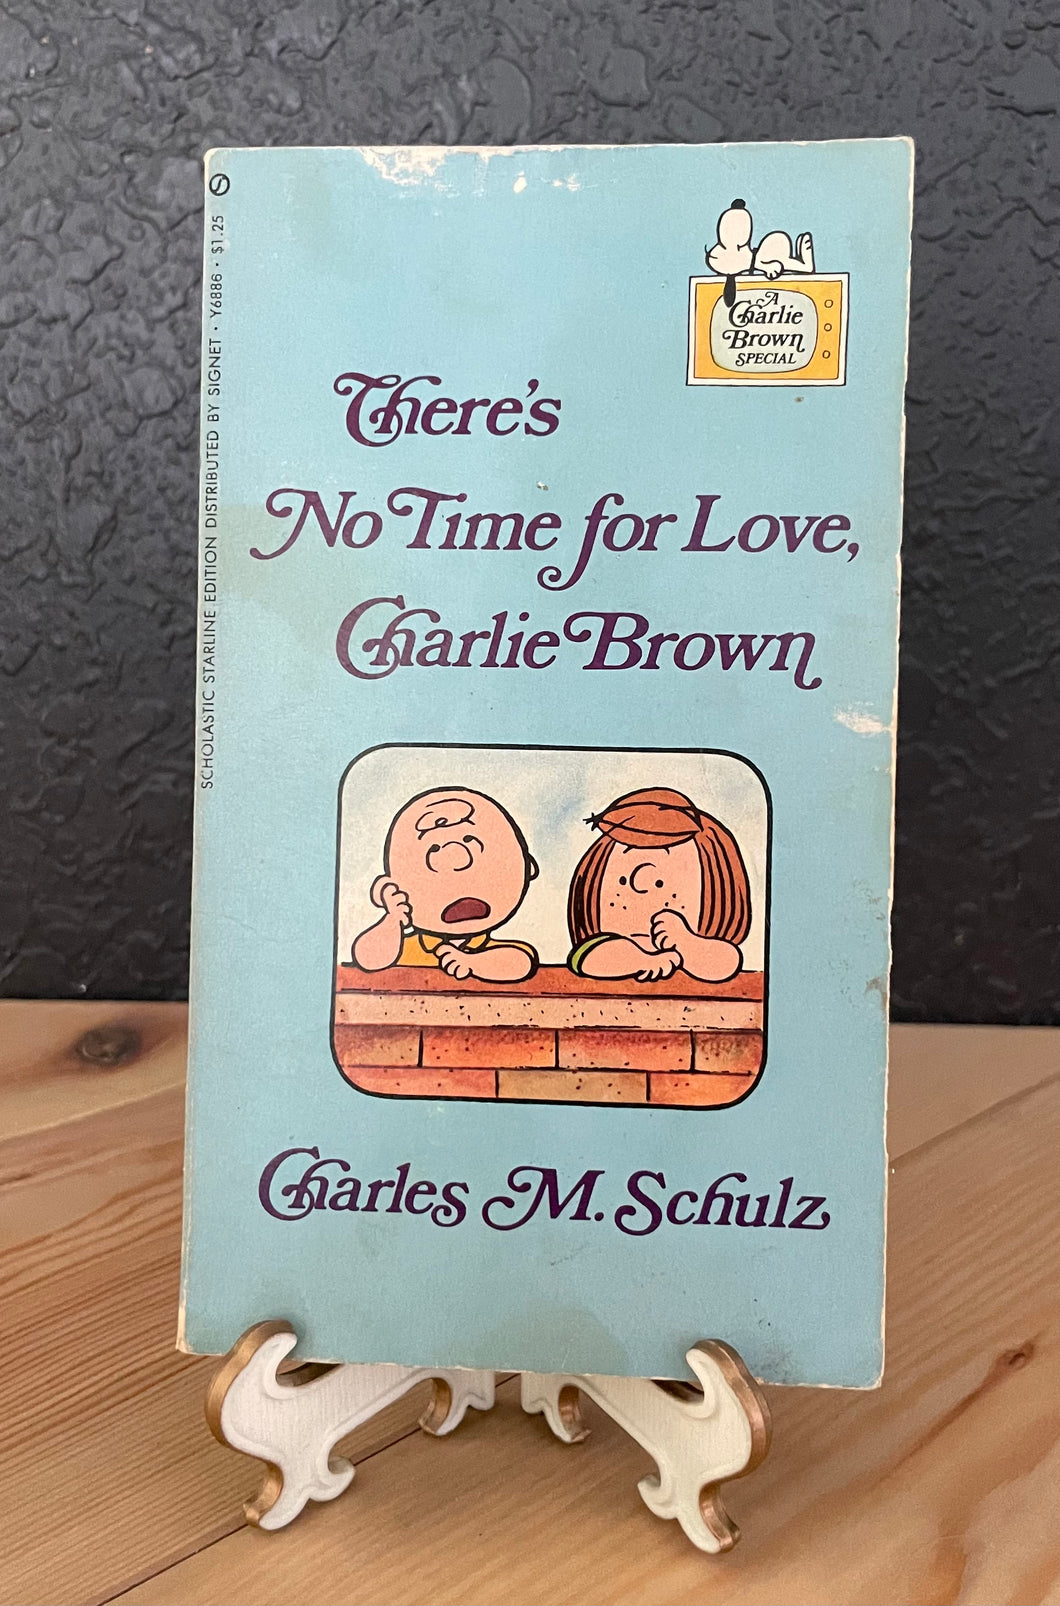 1974 “There’s No Time For Love, Charlie Brown” Vintage Paperback Book